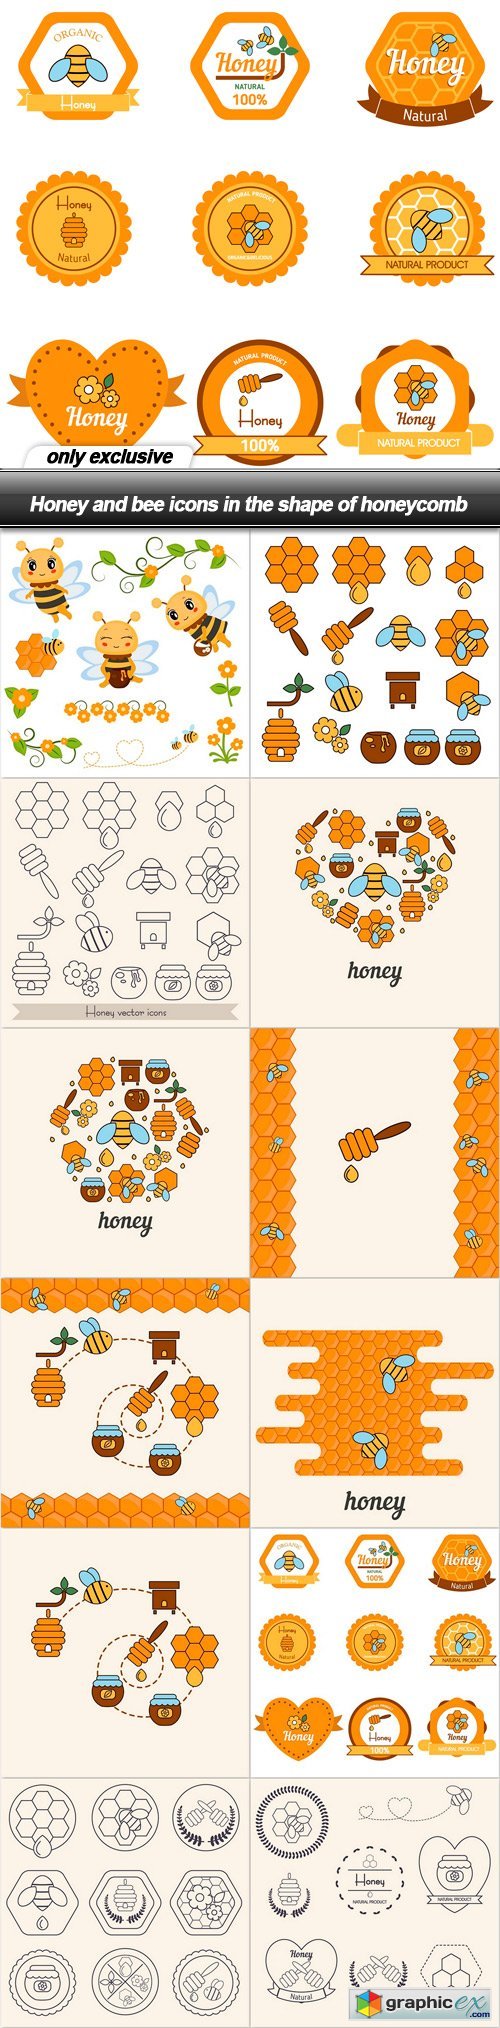 Honey and bee icons in the shape of honeycomb - 12 EPS